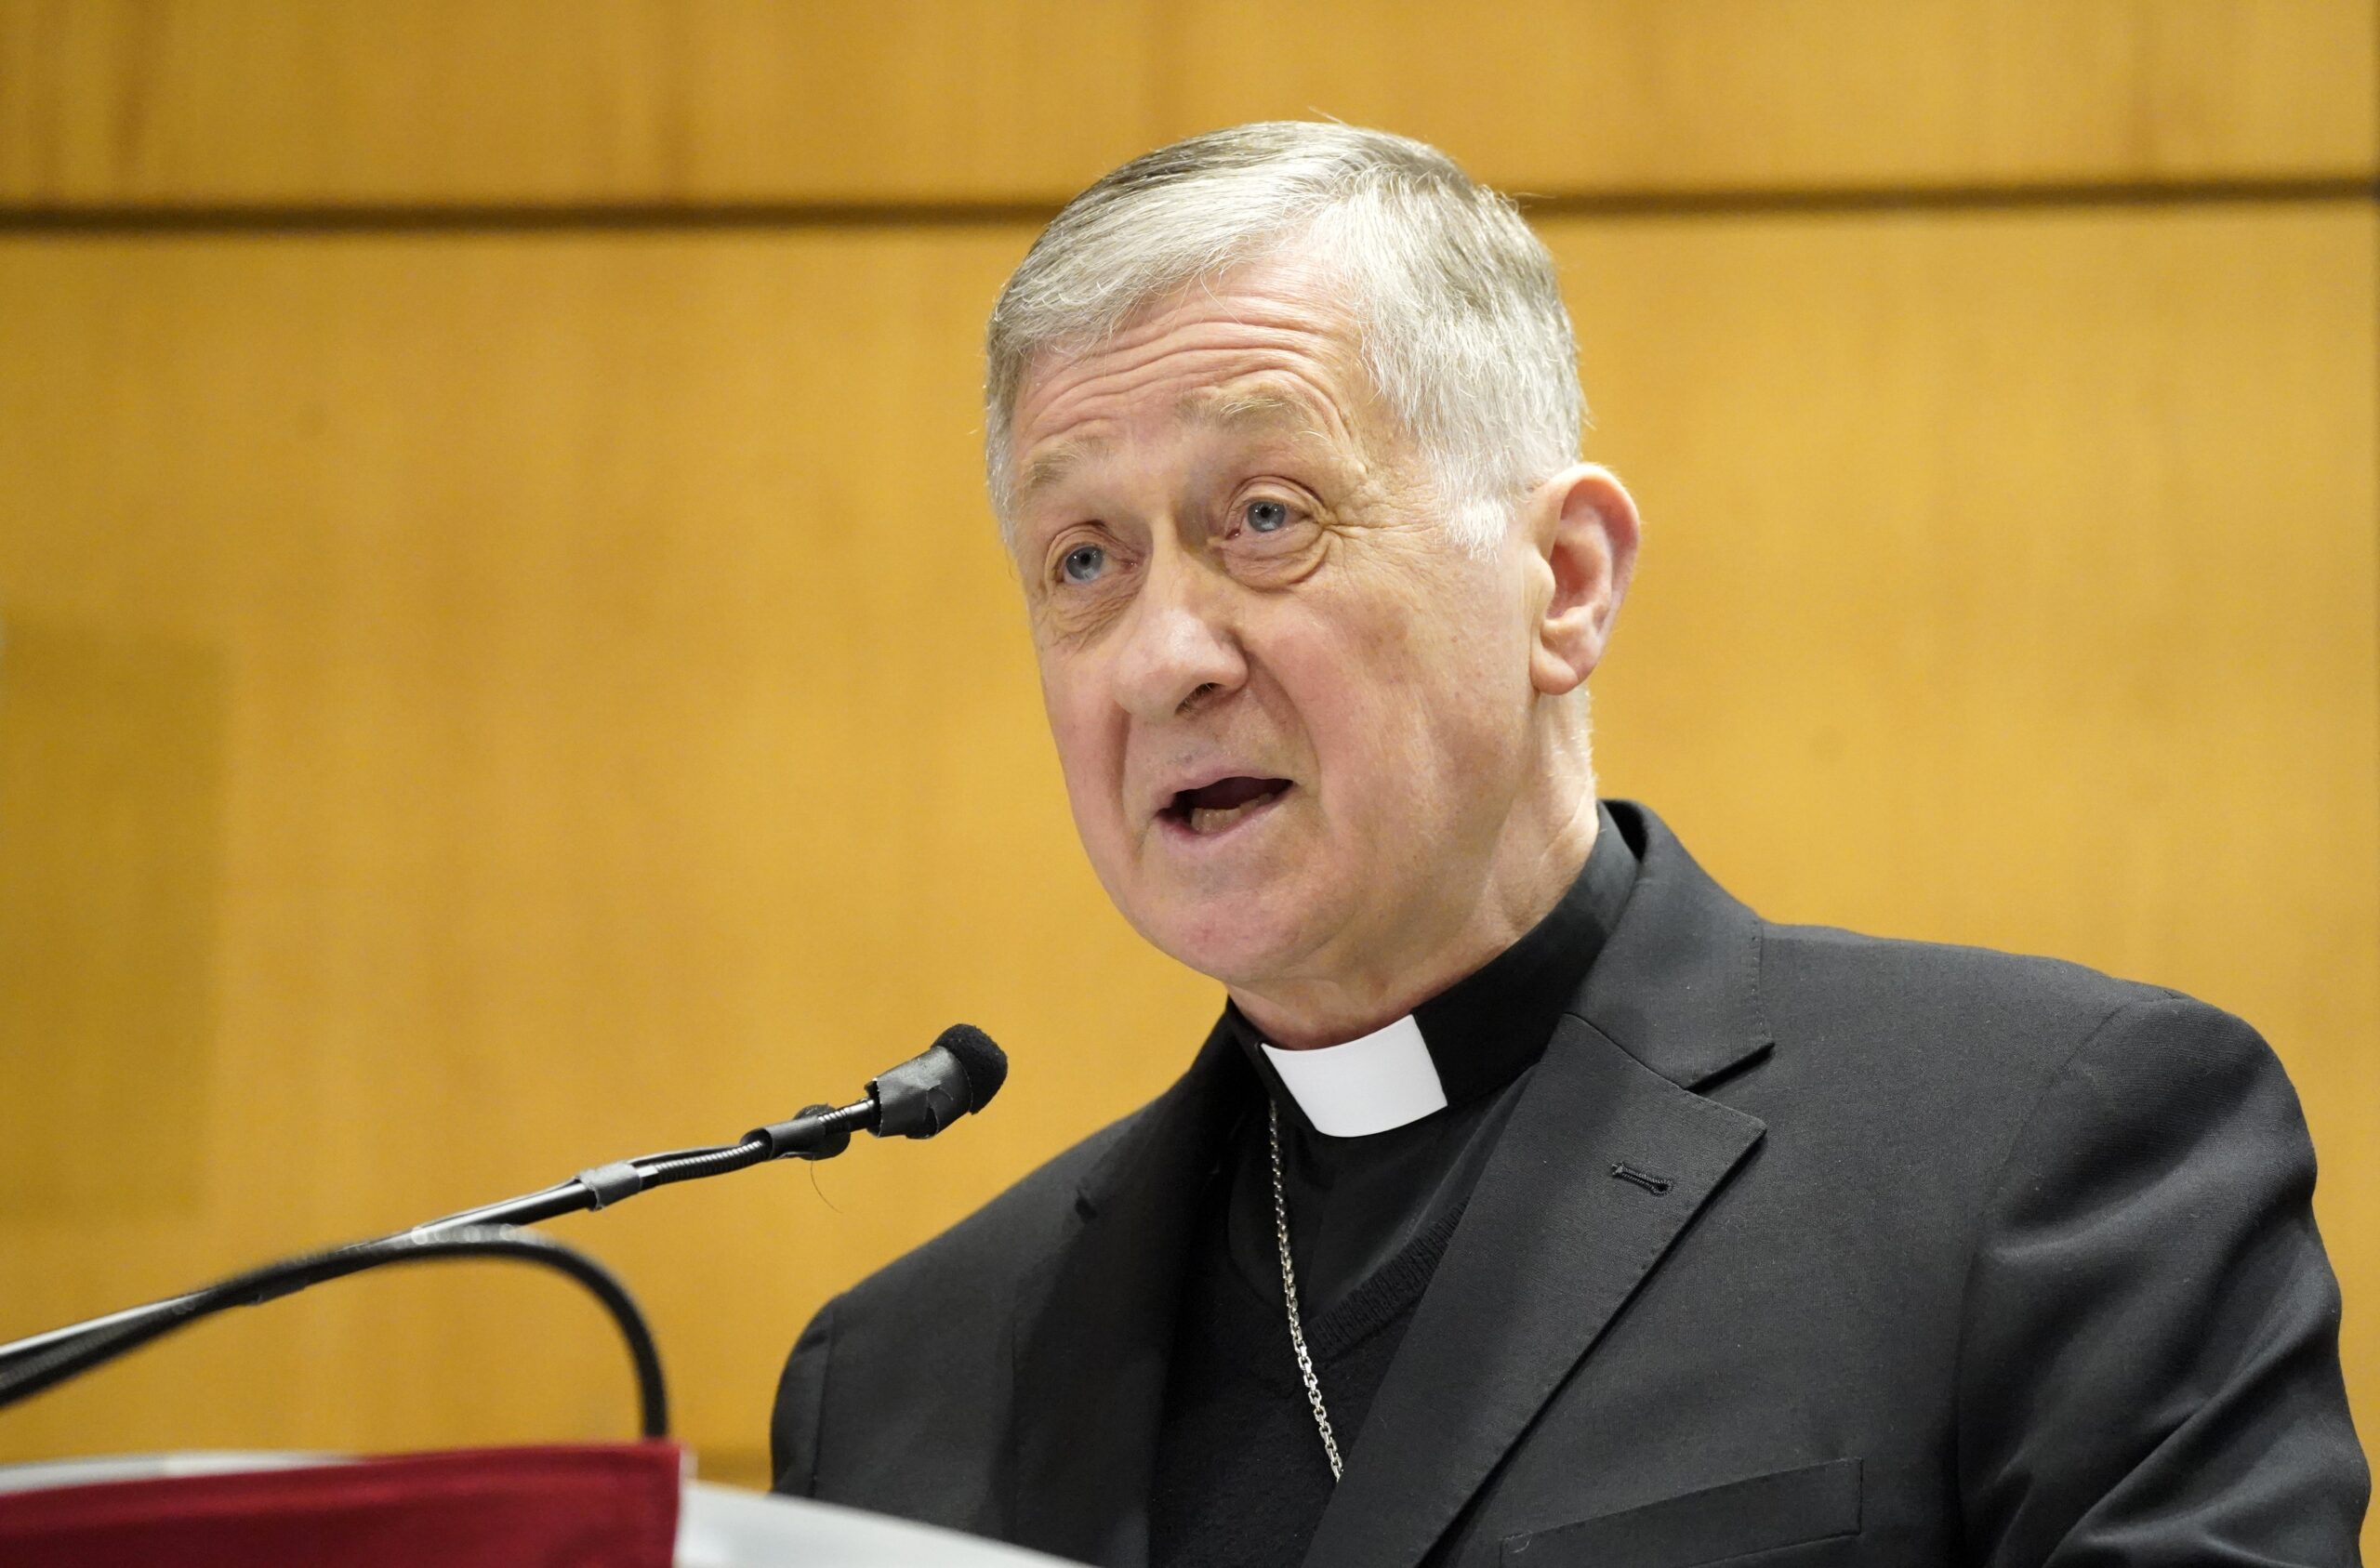 Chicago Cardinal Cupich speaks at Fordham University's Lincoln Center campus in New York City Sept. 26, 2023. The cardinal's lecture focused on the landmark "Consistent Ethic of Life" speech given by Chicago Cardinal Joseph L. Bernardin at the school 40 years ago. The event was a presentation of Fordham's Center on Religion and Culture. (OSV News photo/Gregory A. Shemitz)